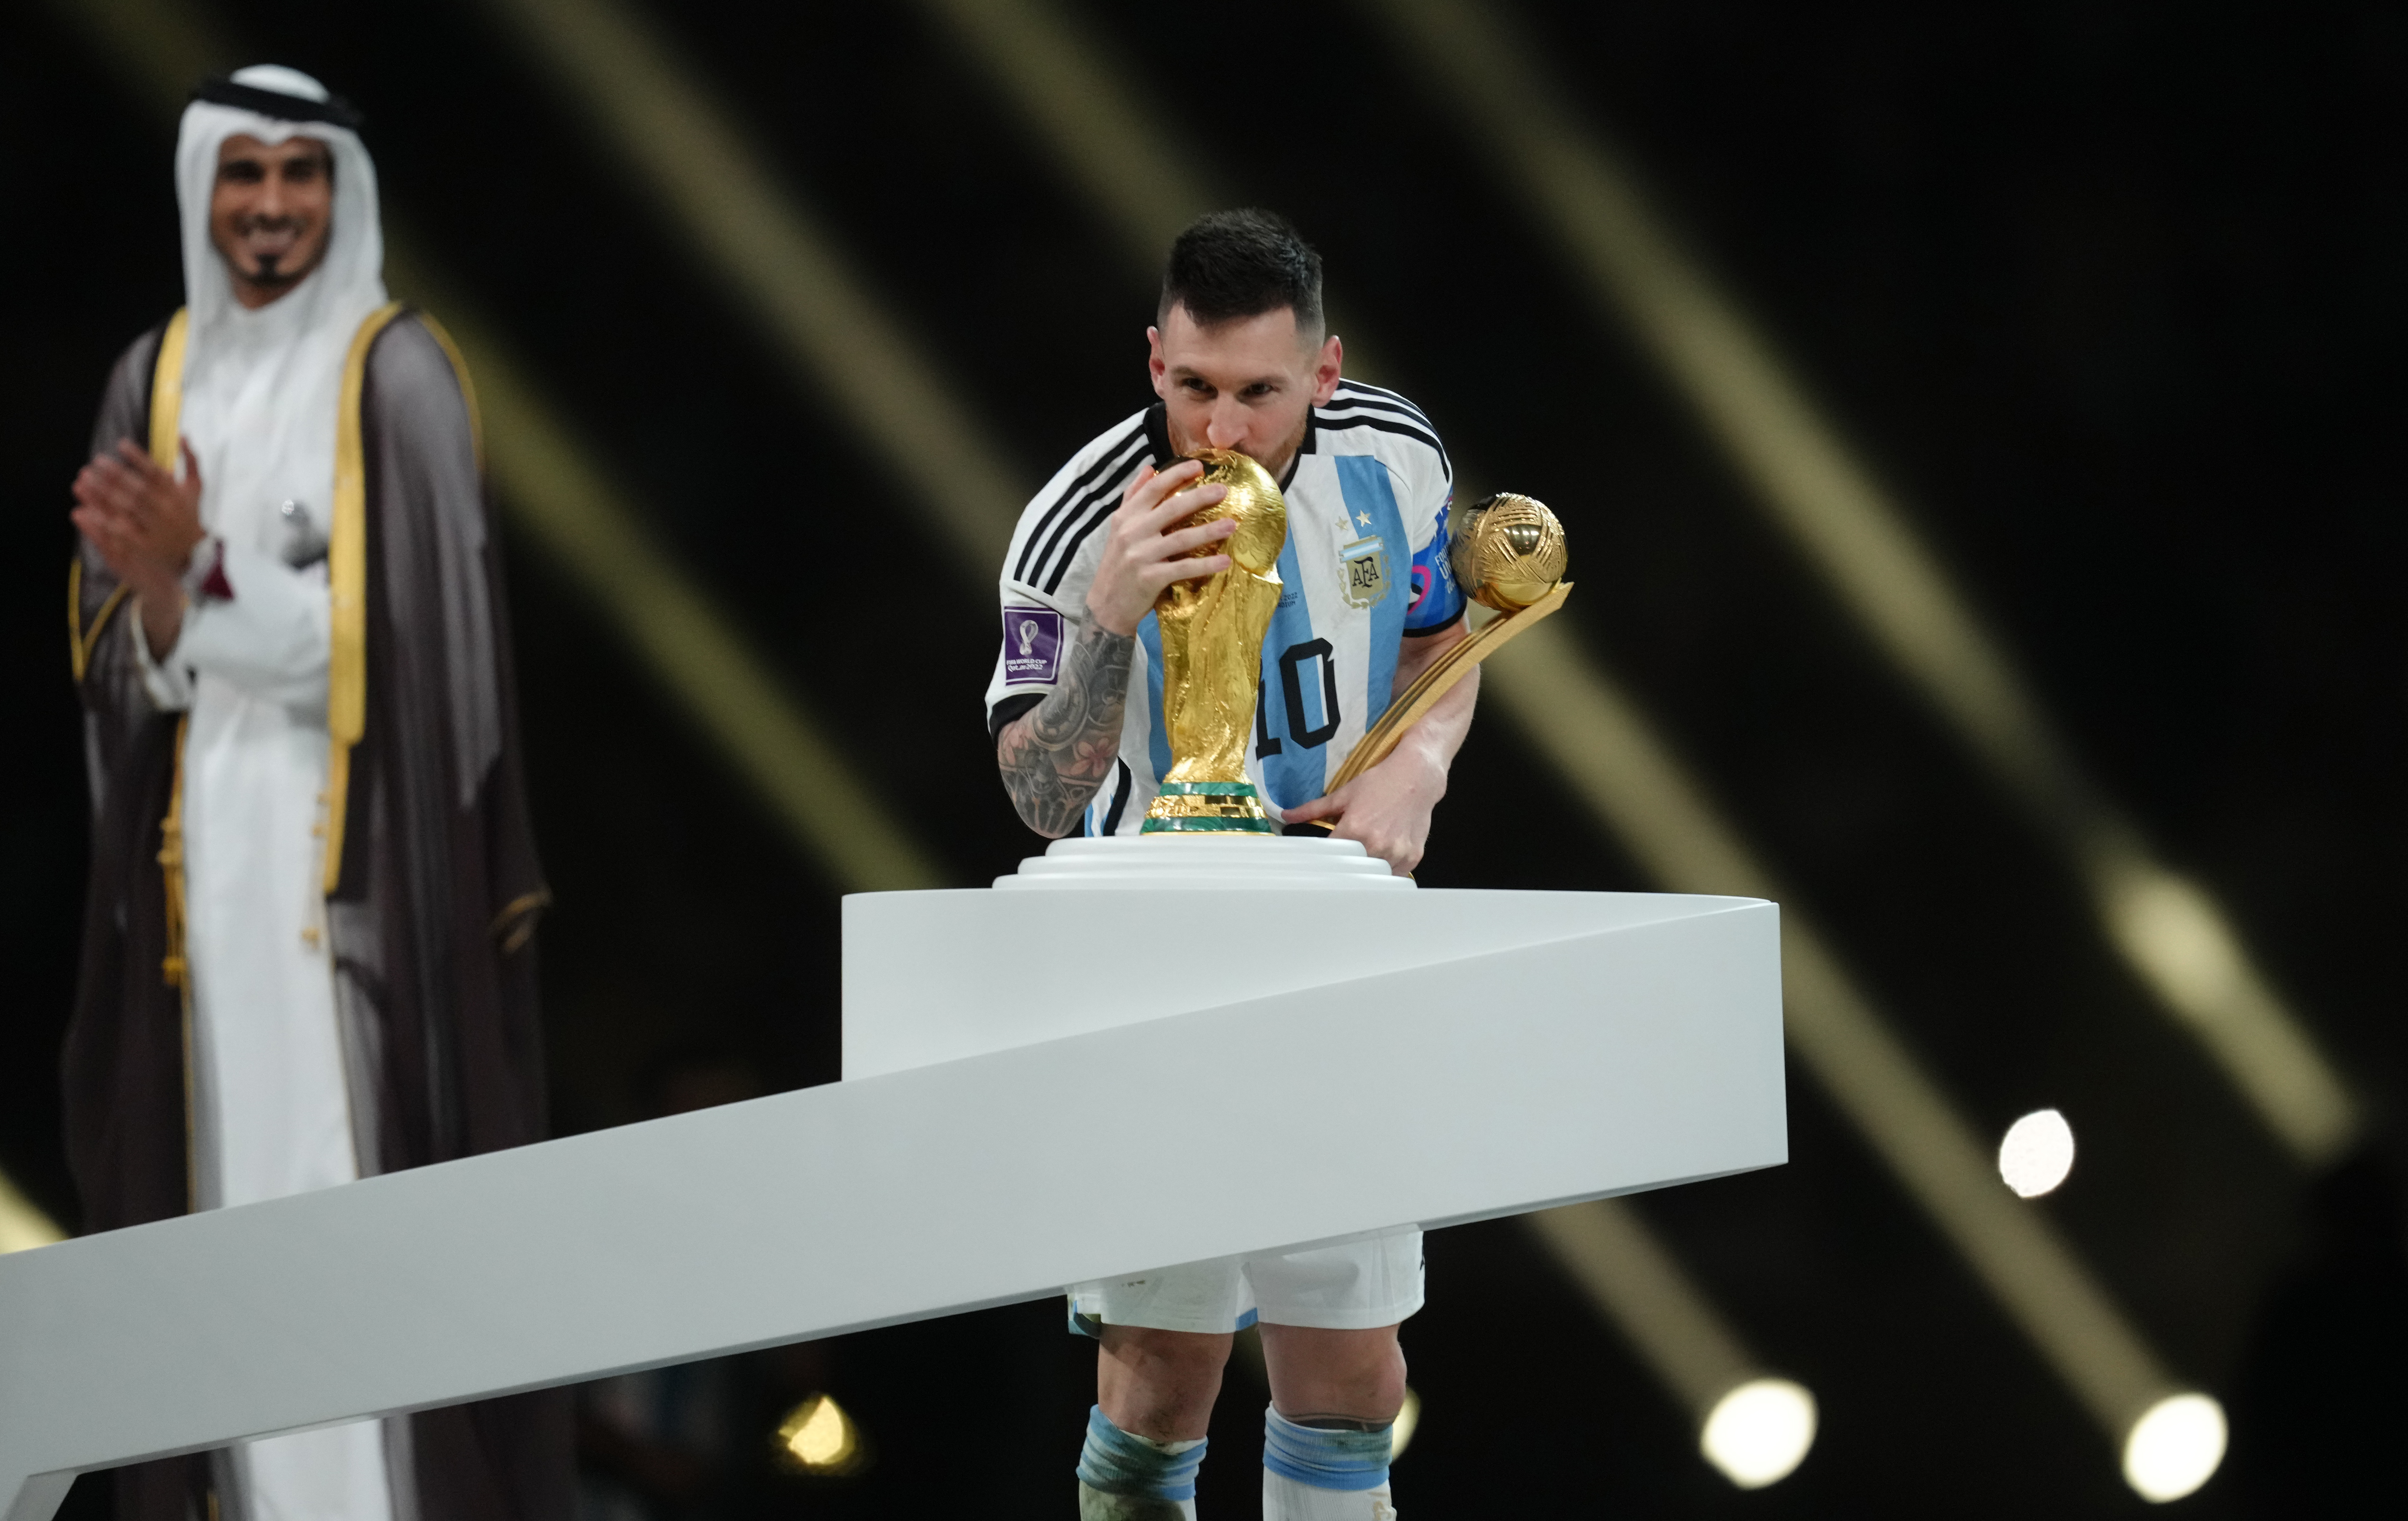 Messi captained Argentina to World Cup success last year